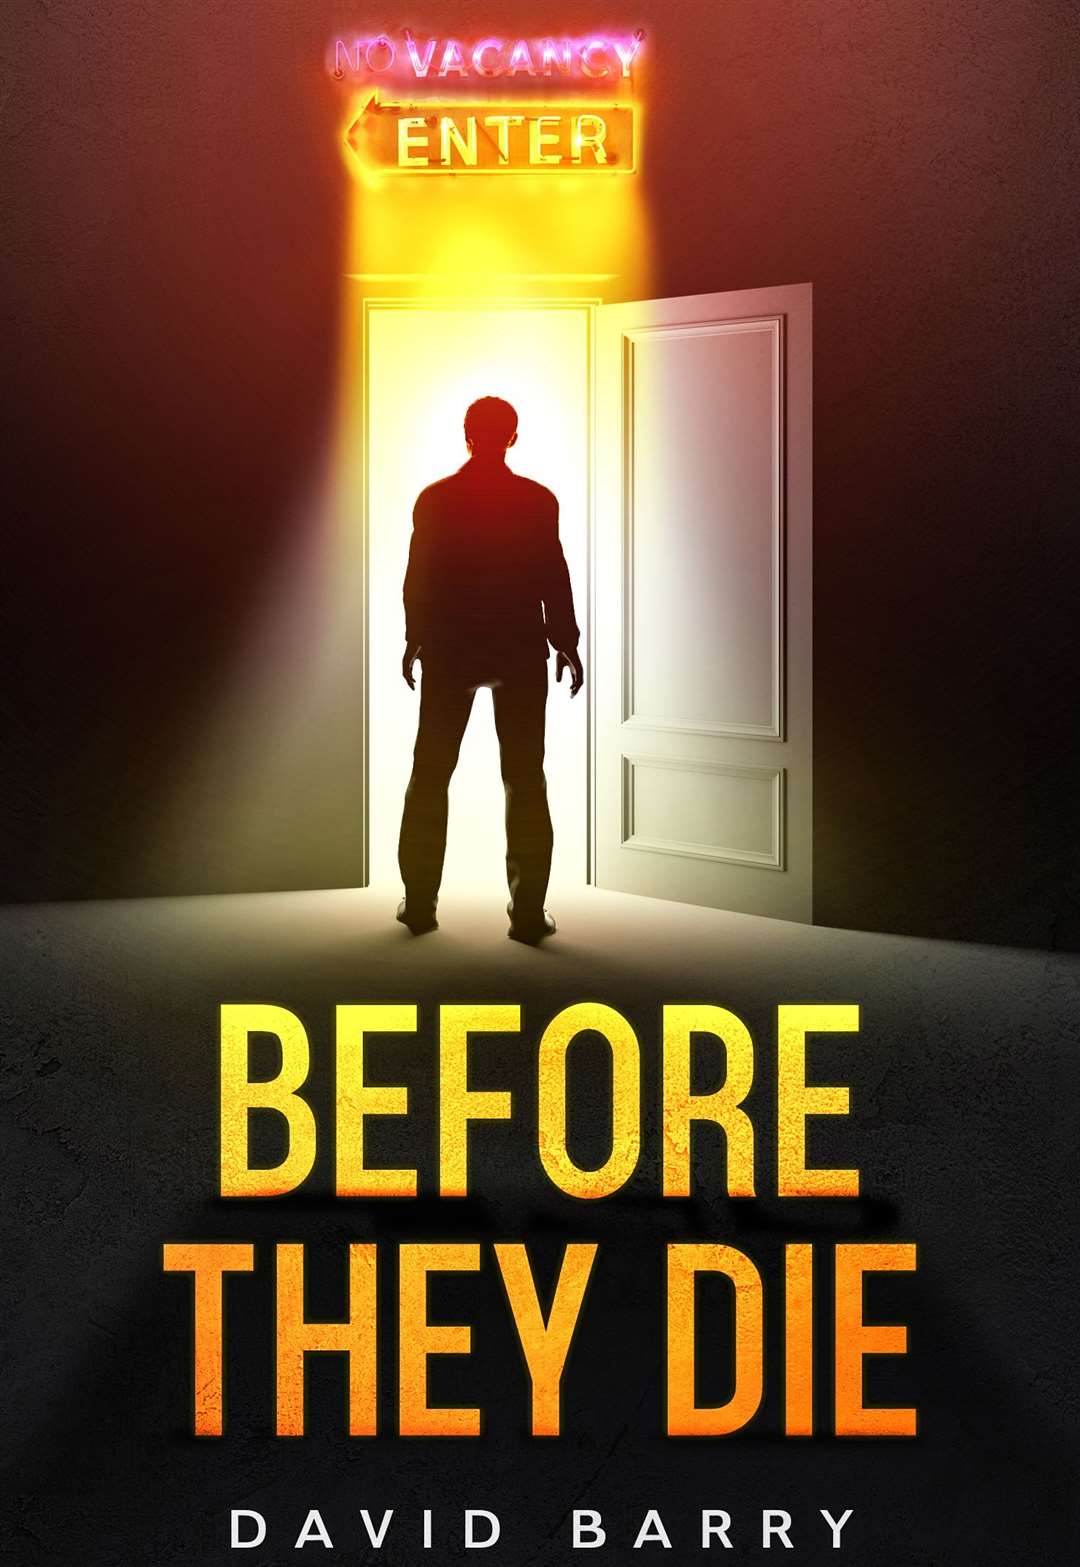 Tunbridge Wells actor-turned-author David Barry's new book Before They Die (32916418)